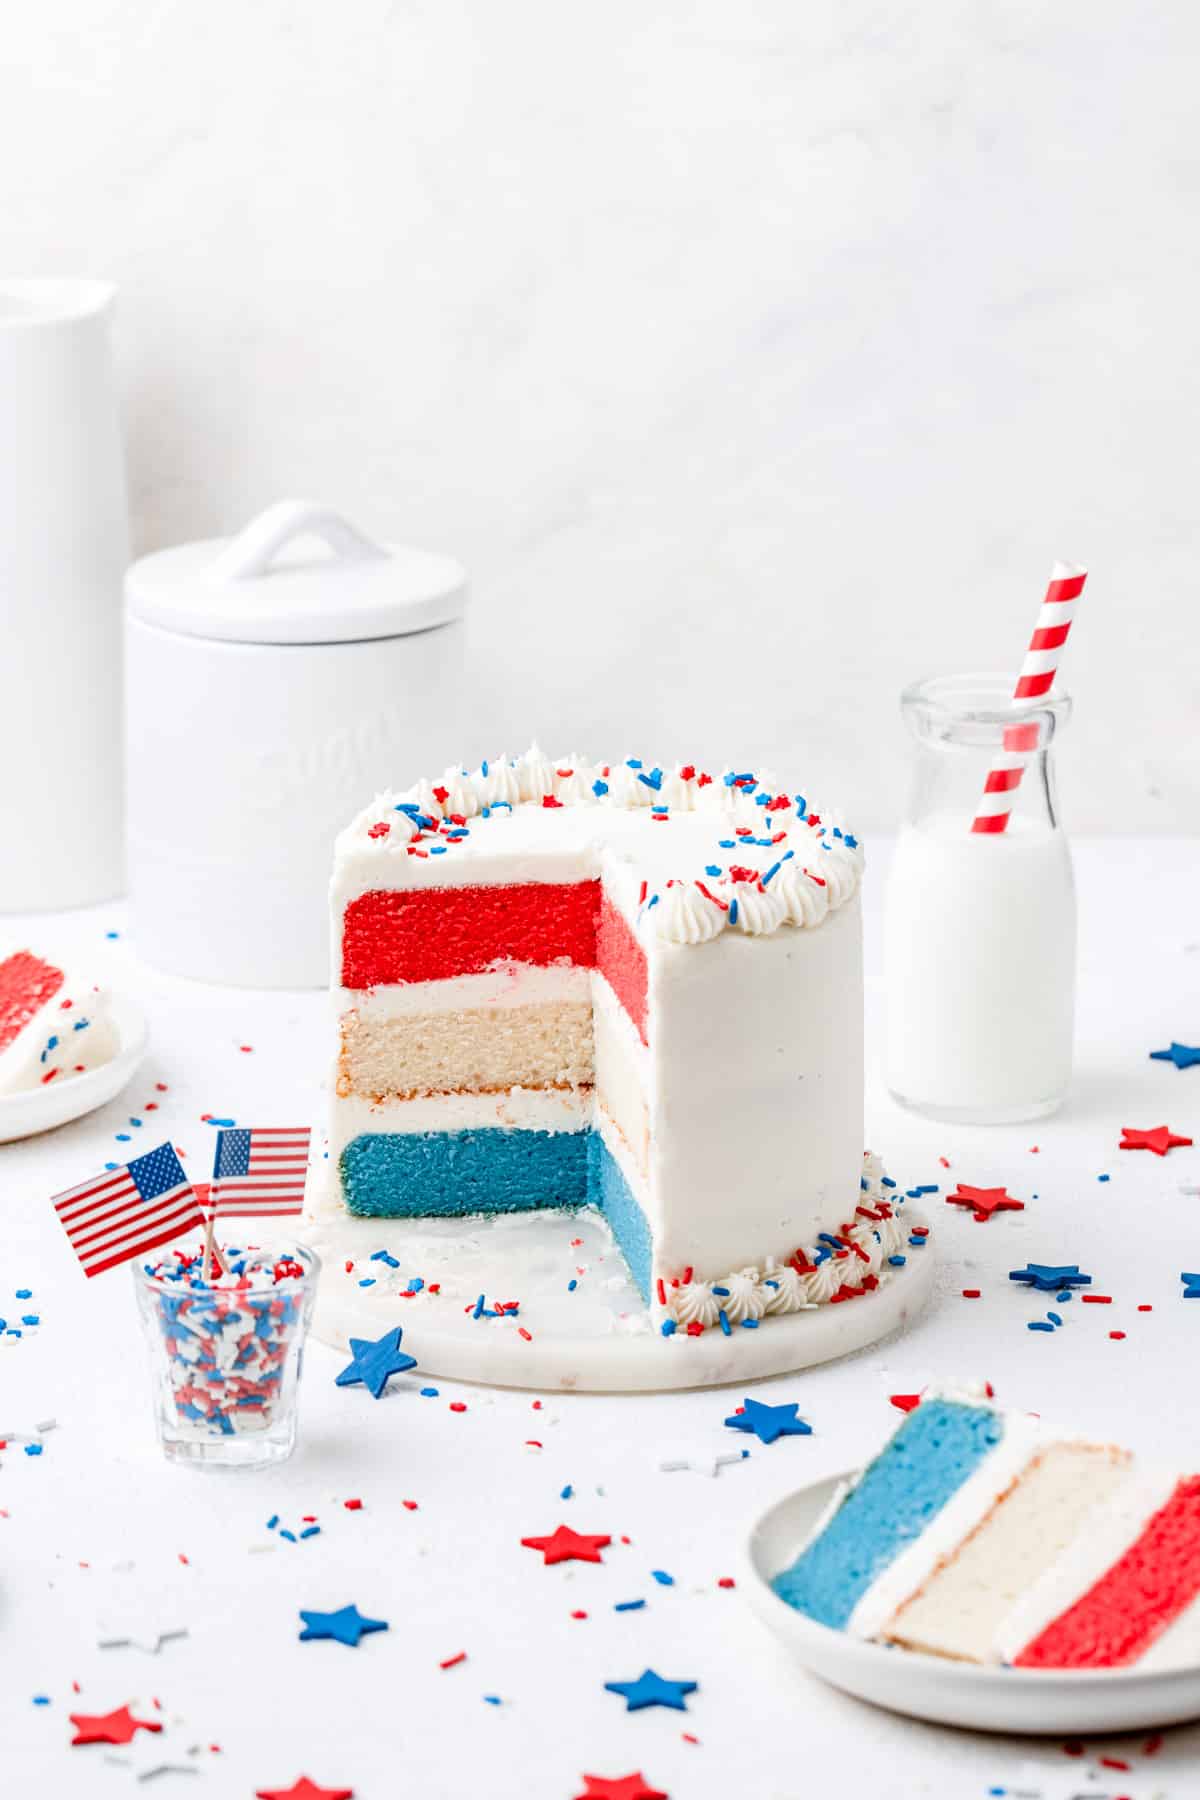 inside shot of red white and blue layer cake.